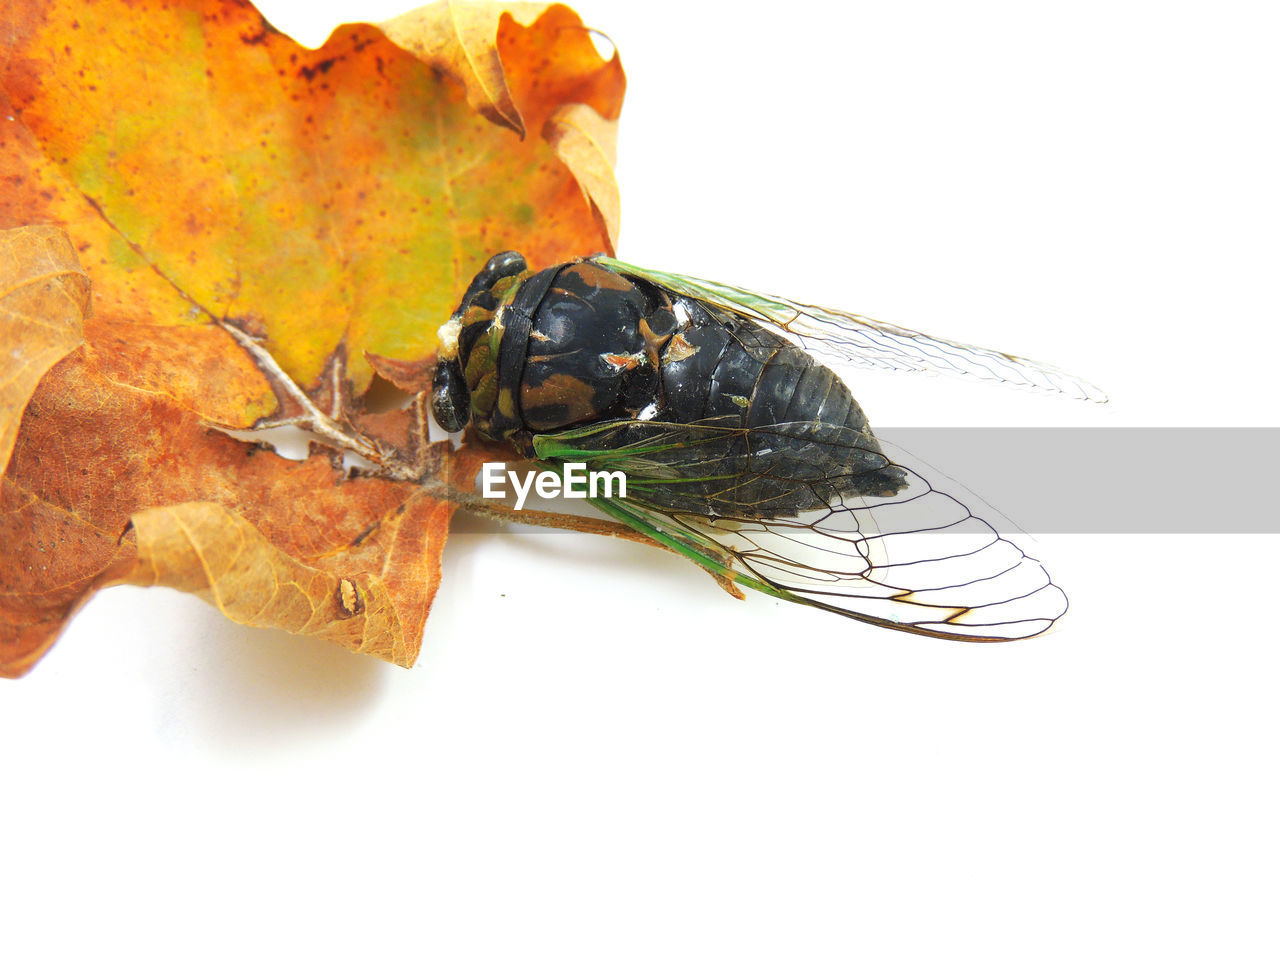 Close-up of insect feeding on autumn leaf against white background